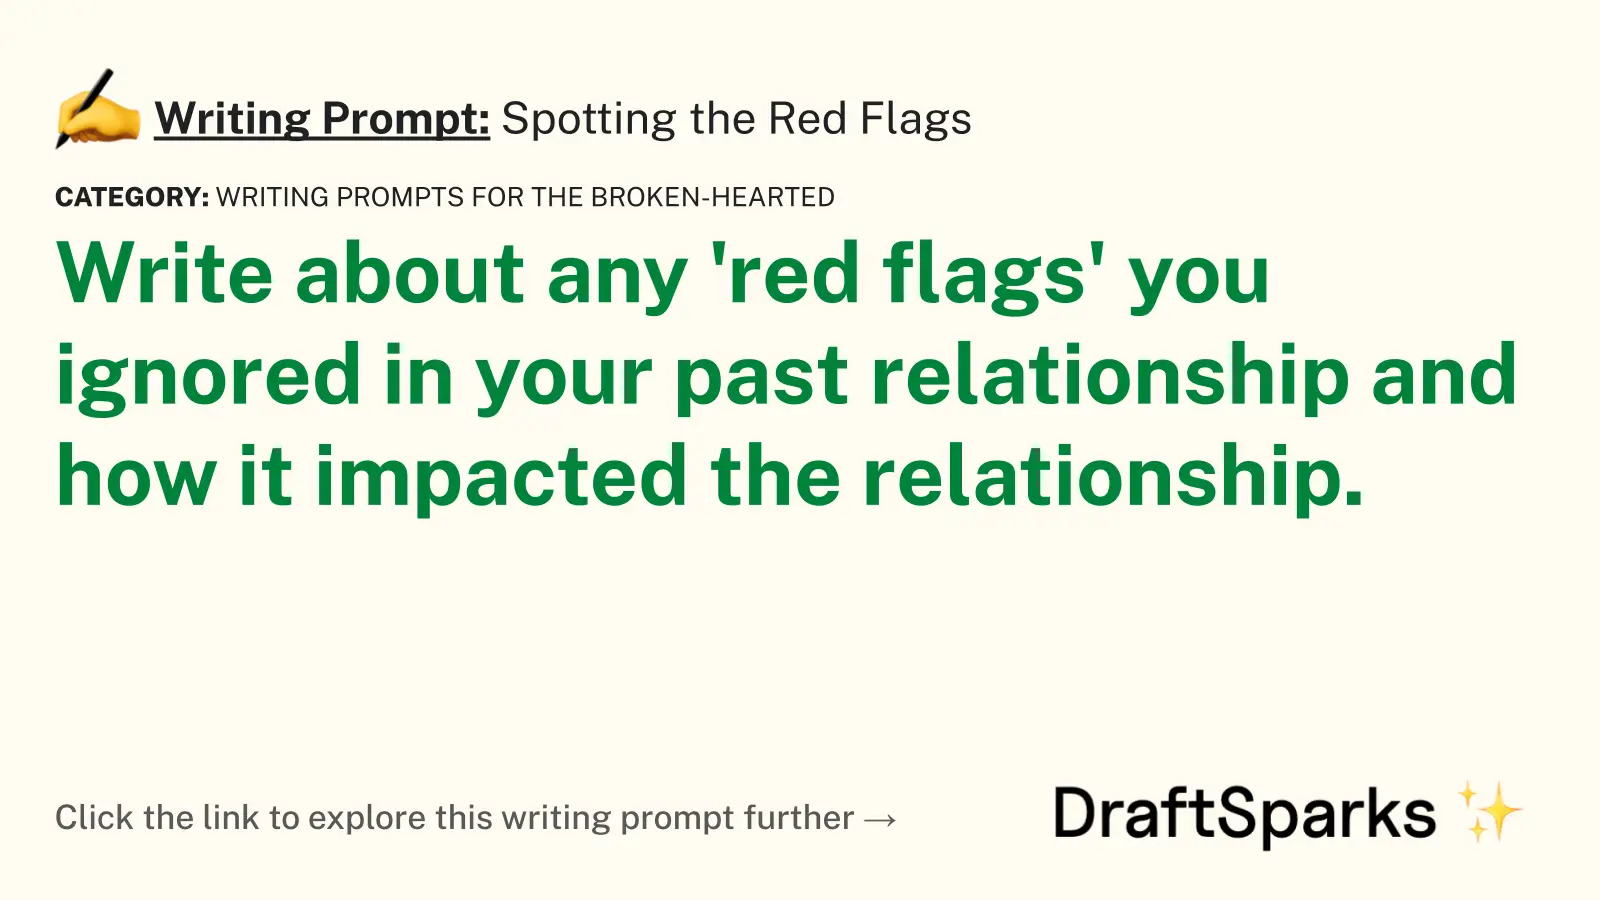 Spotting the Red Flags